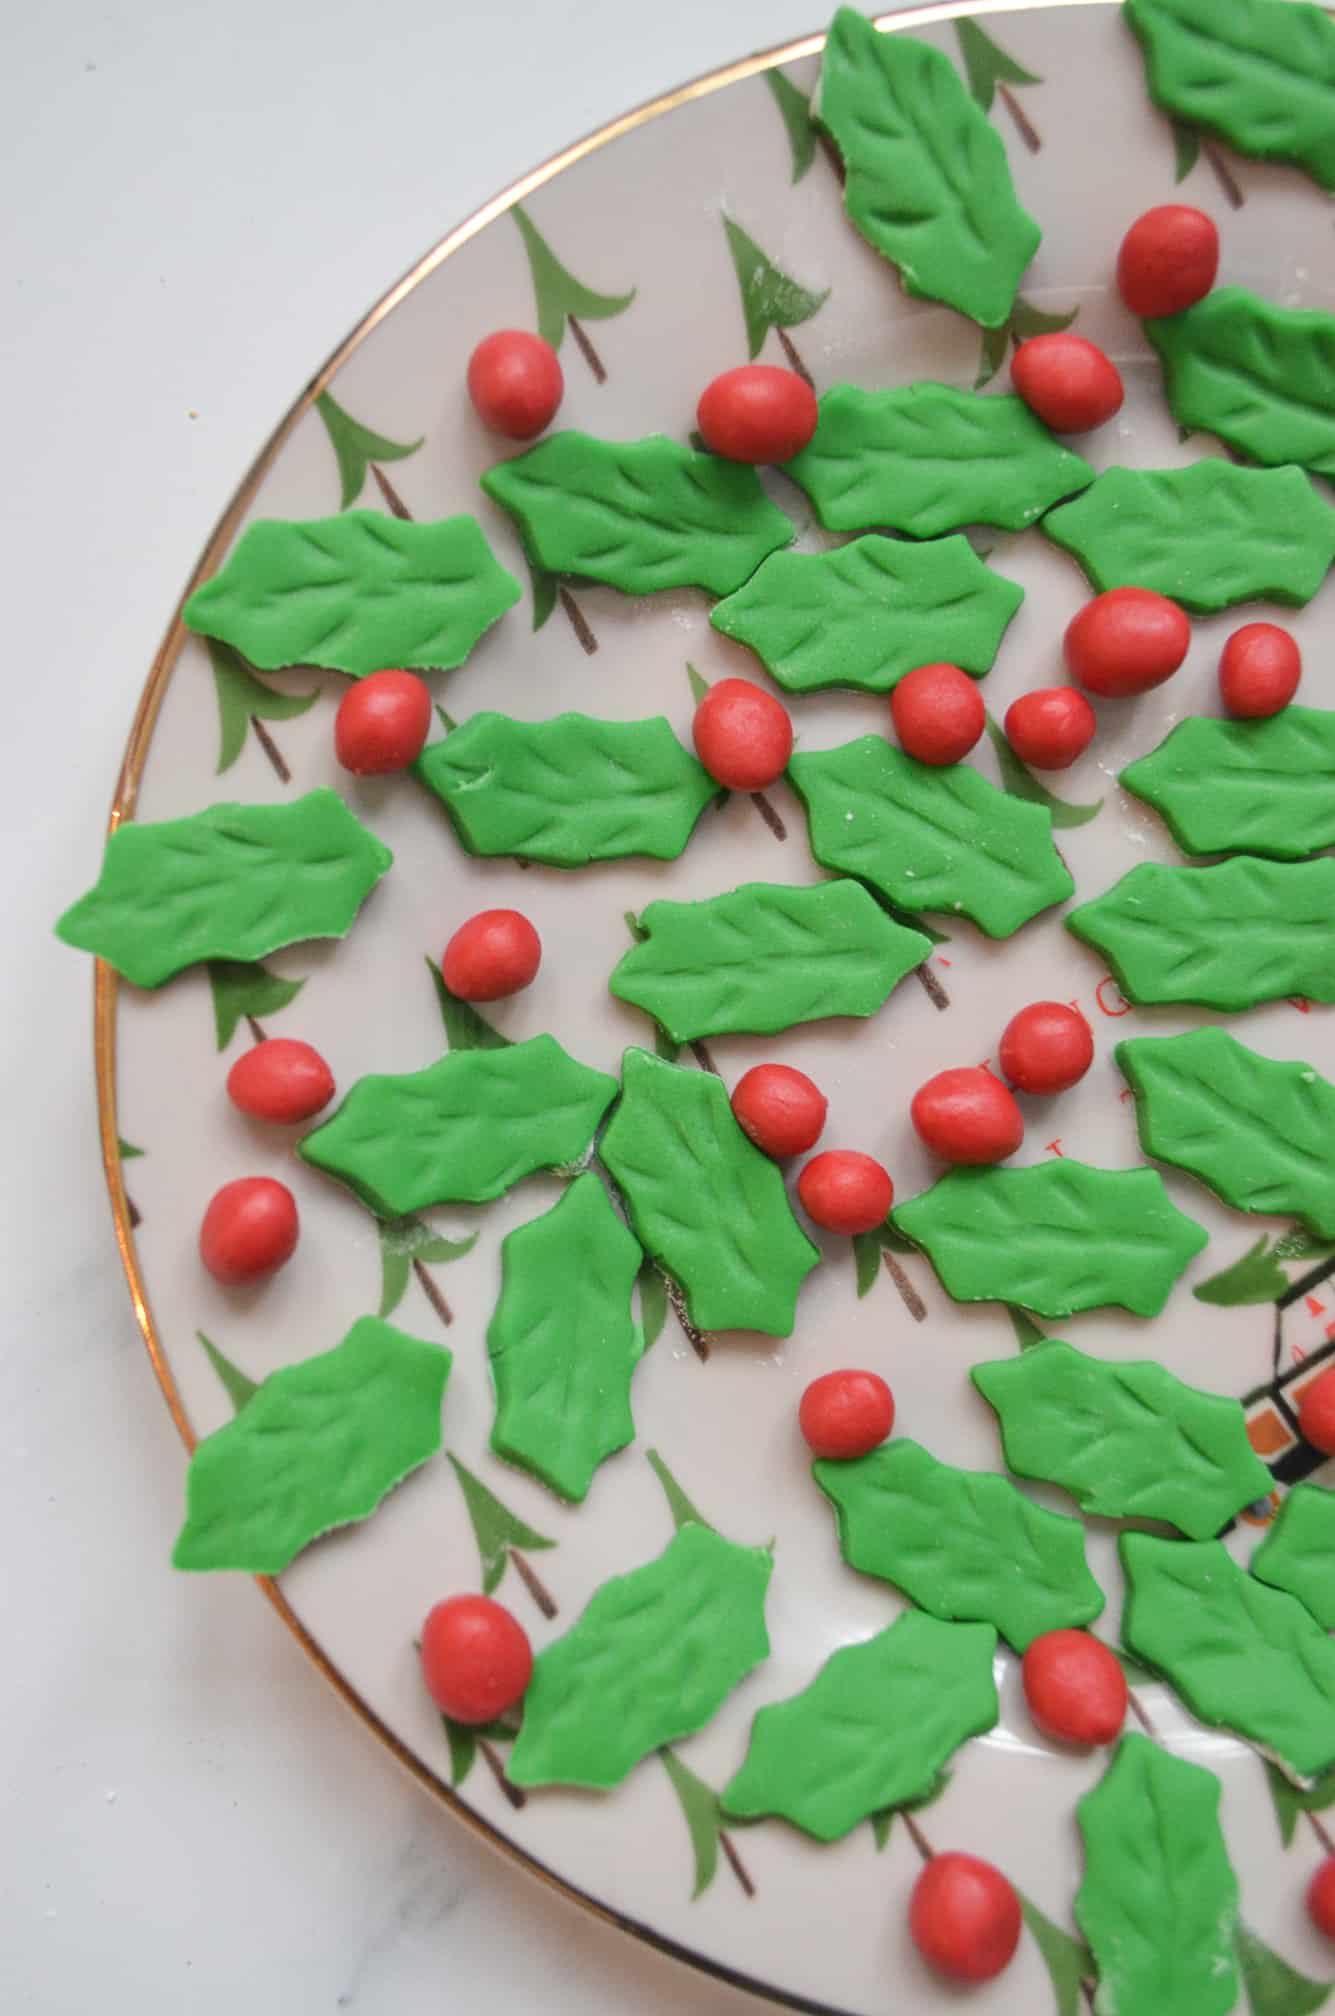 fondant holly and berry decorations